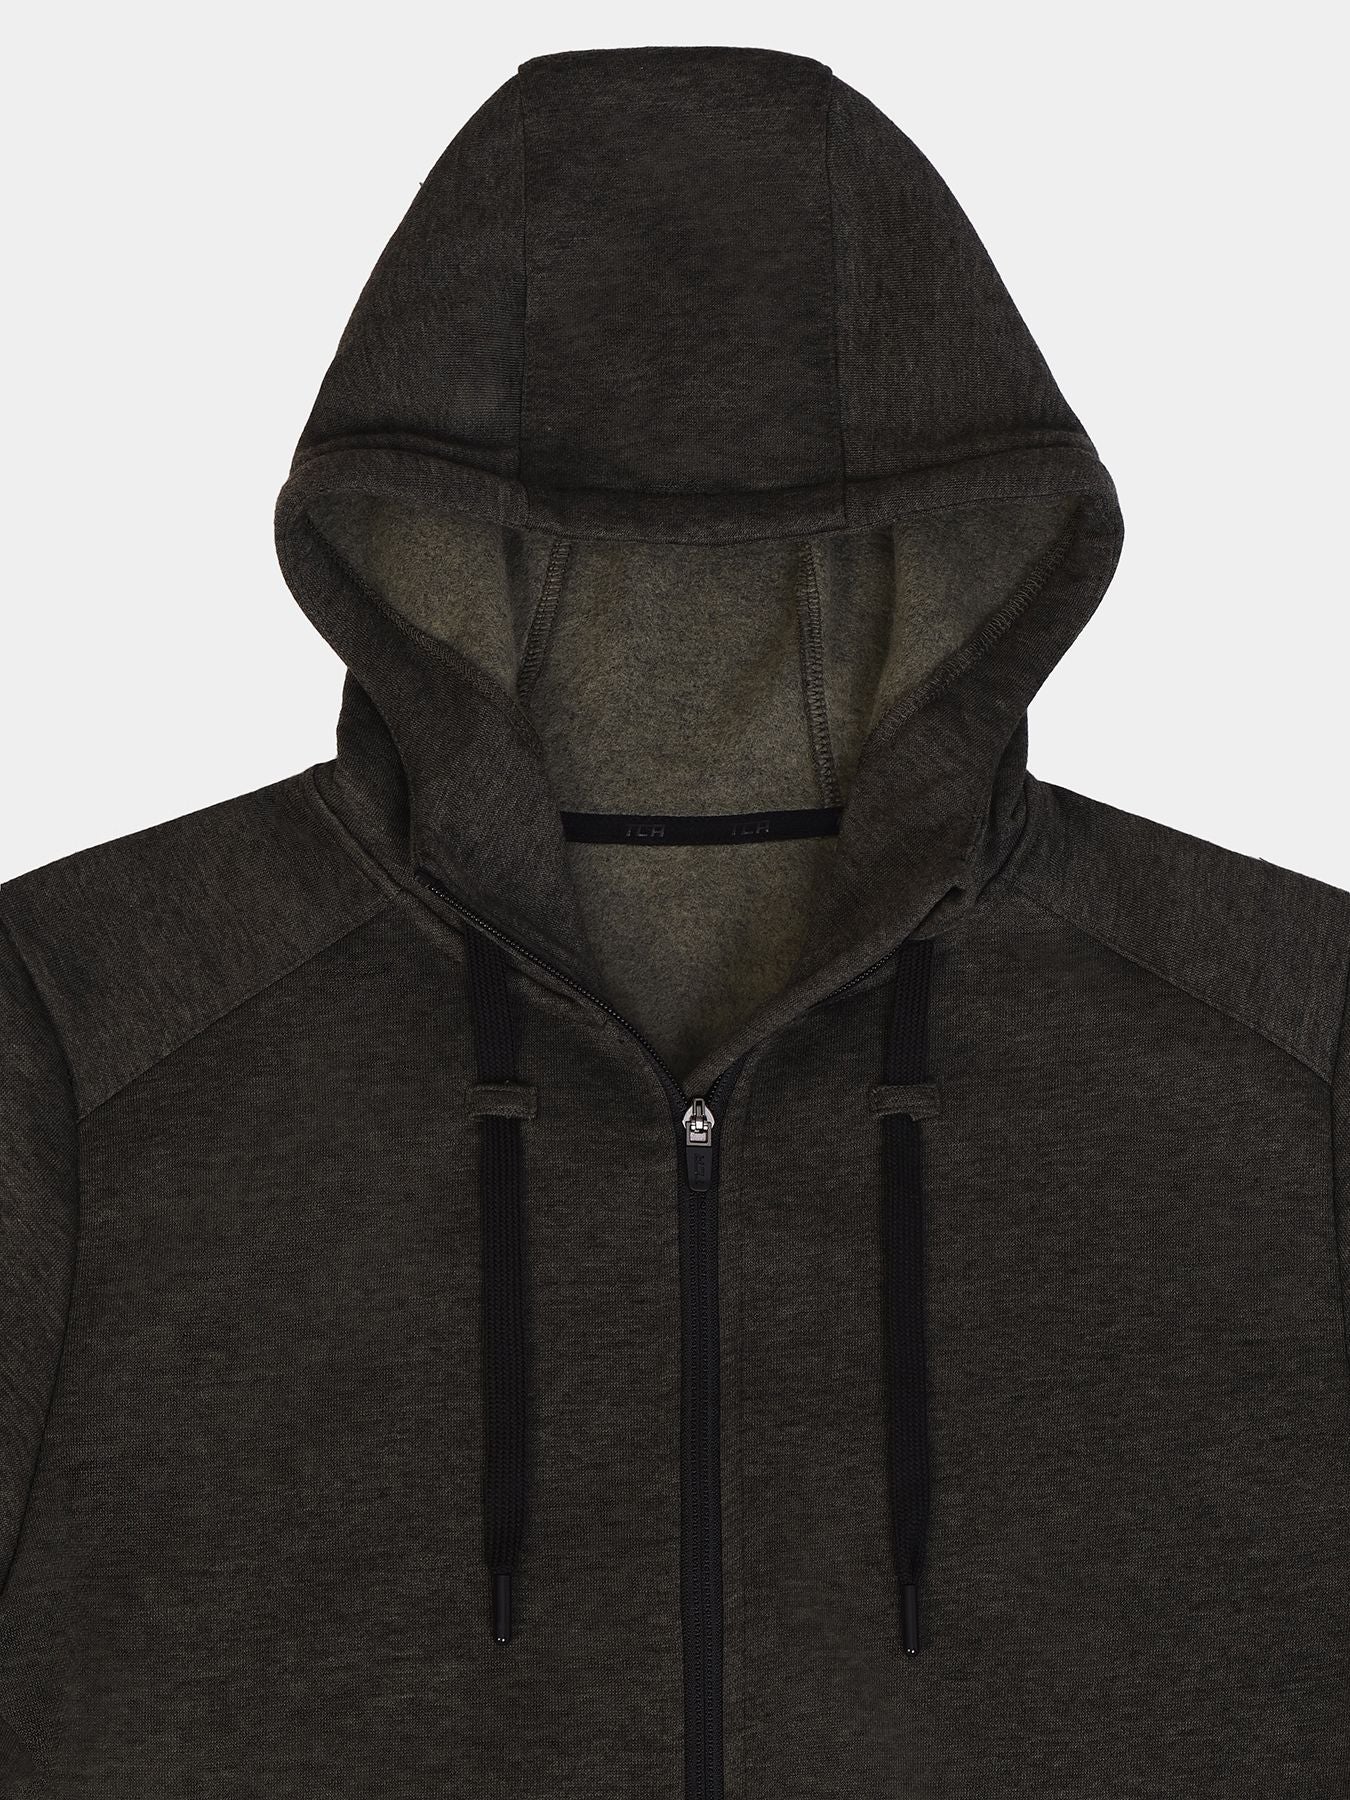 Revolution Tech Gym Running Hoodie For Men With Zip Pockets